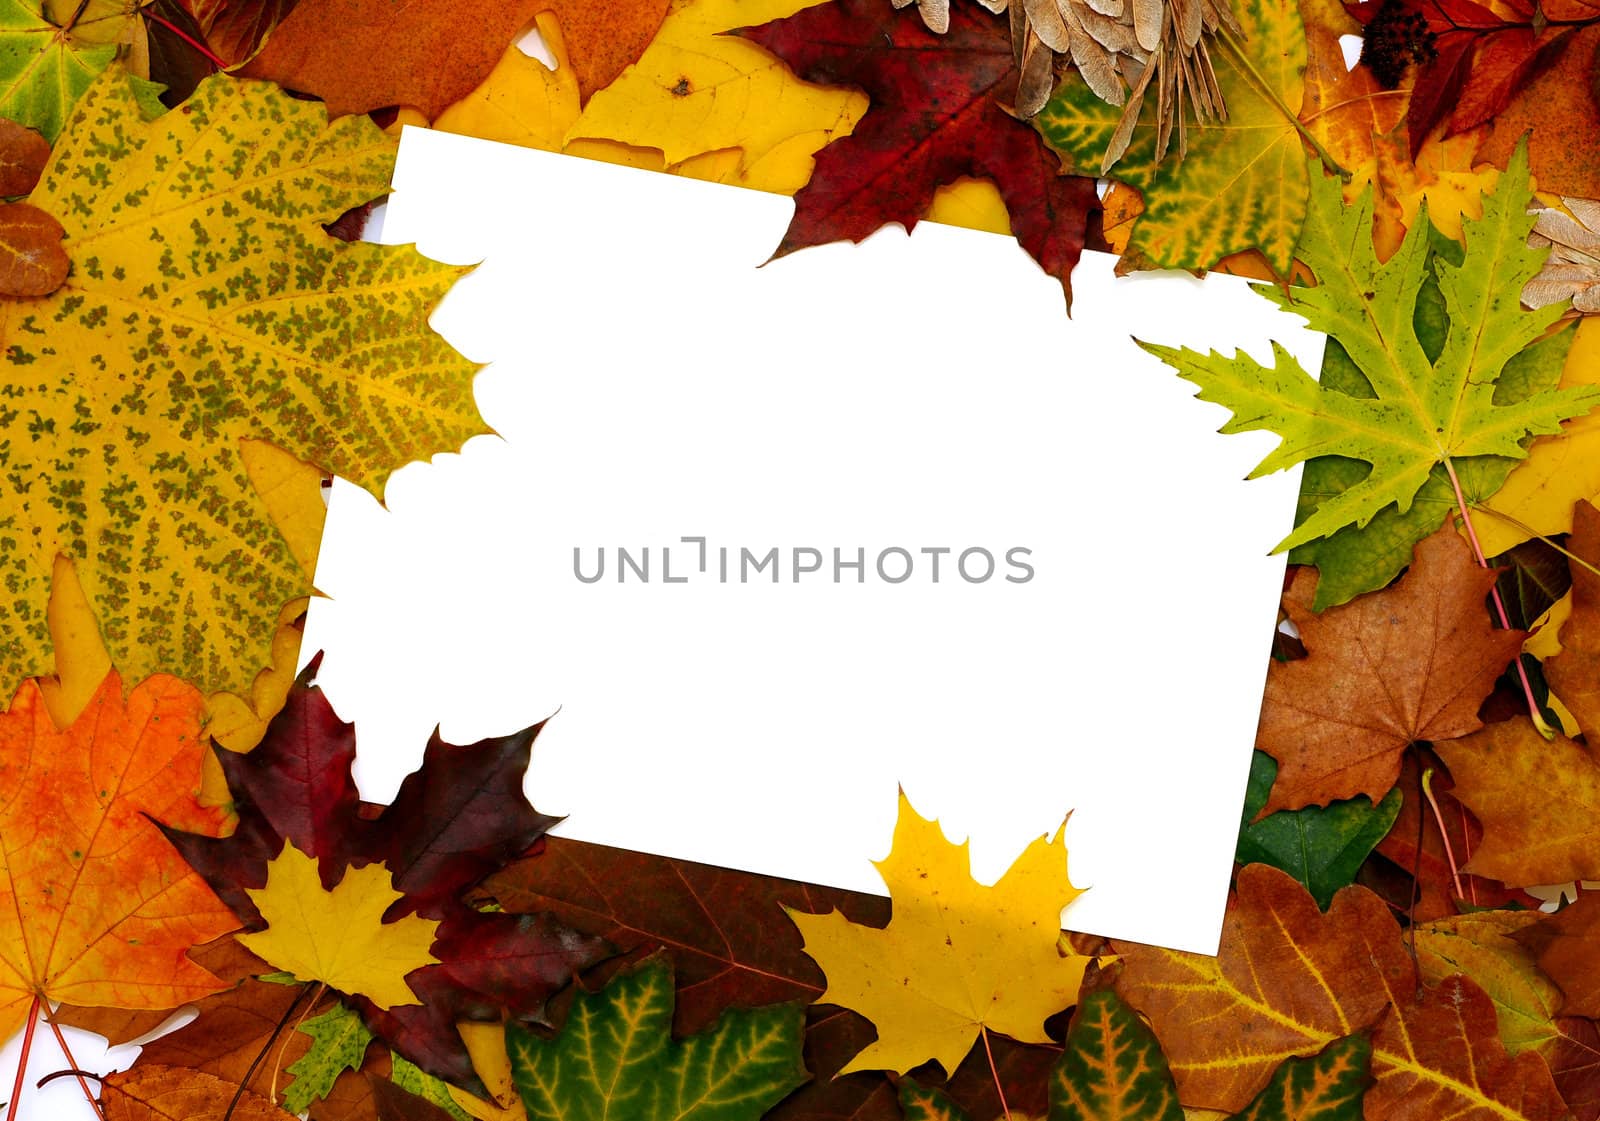 Colorful frame of fallen autumn leaves with text message